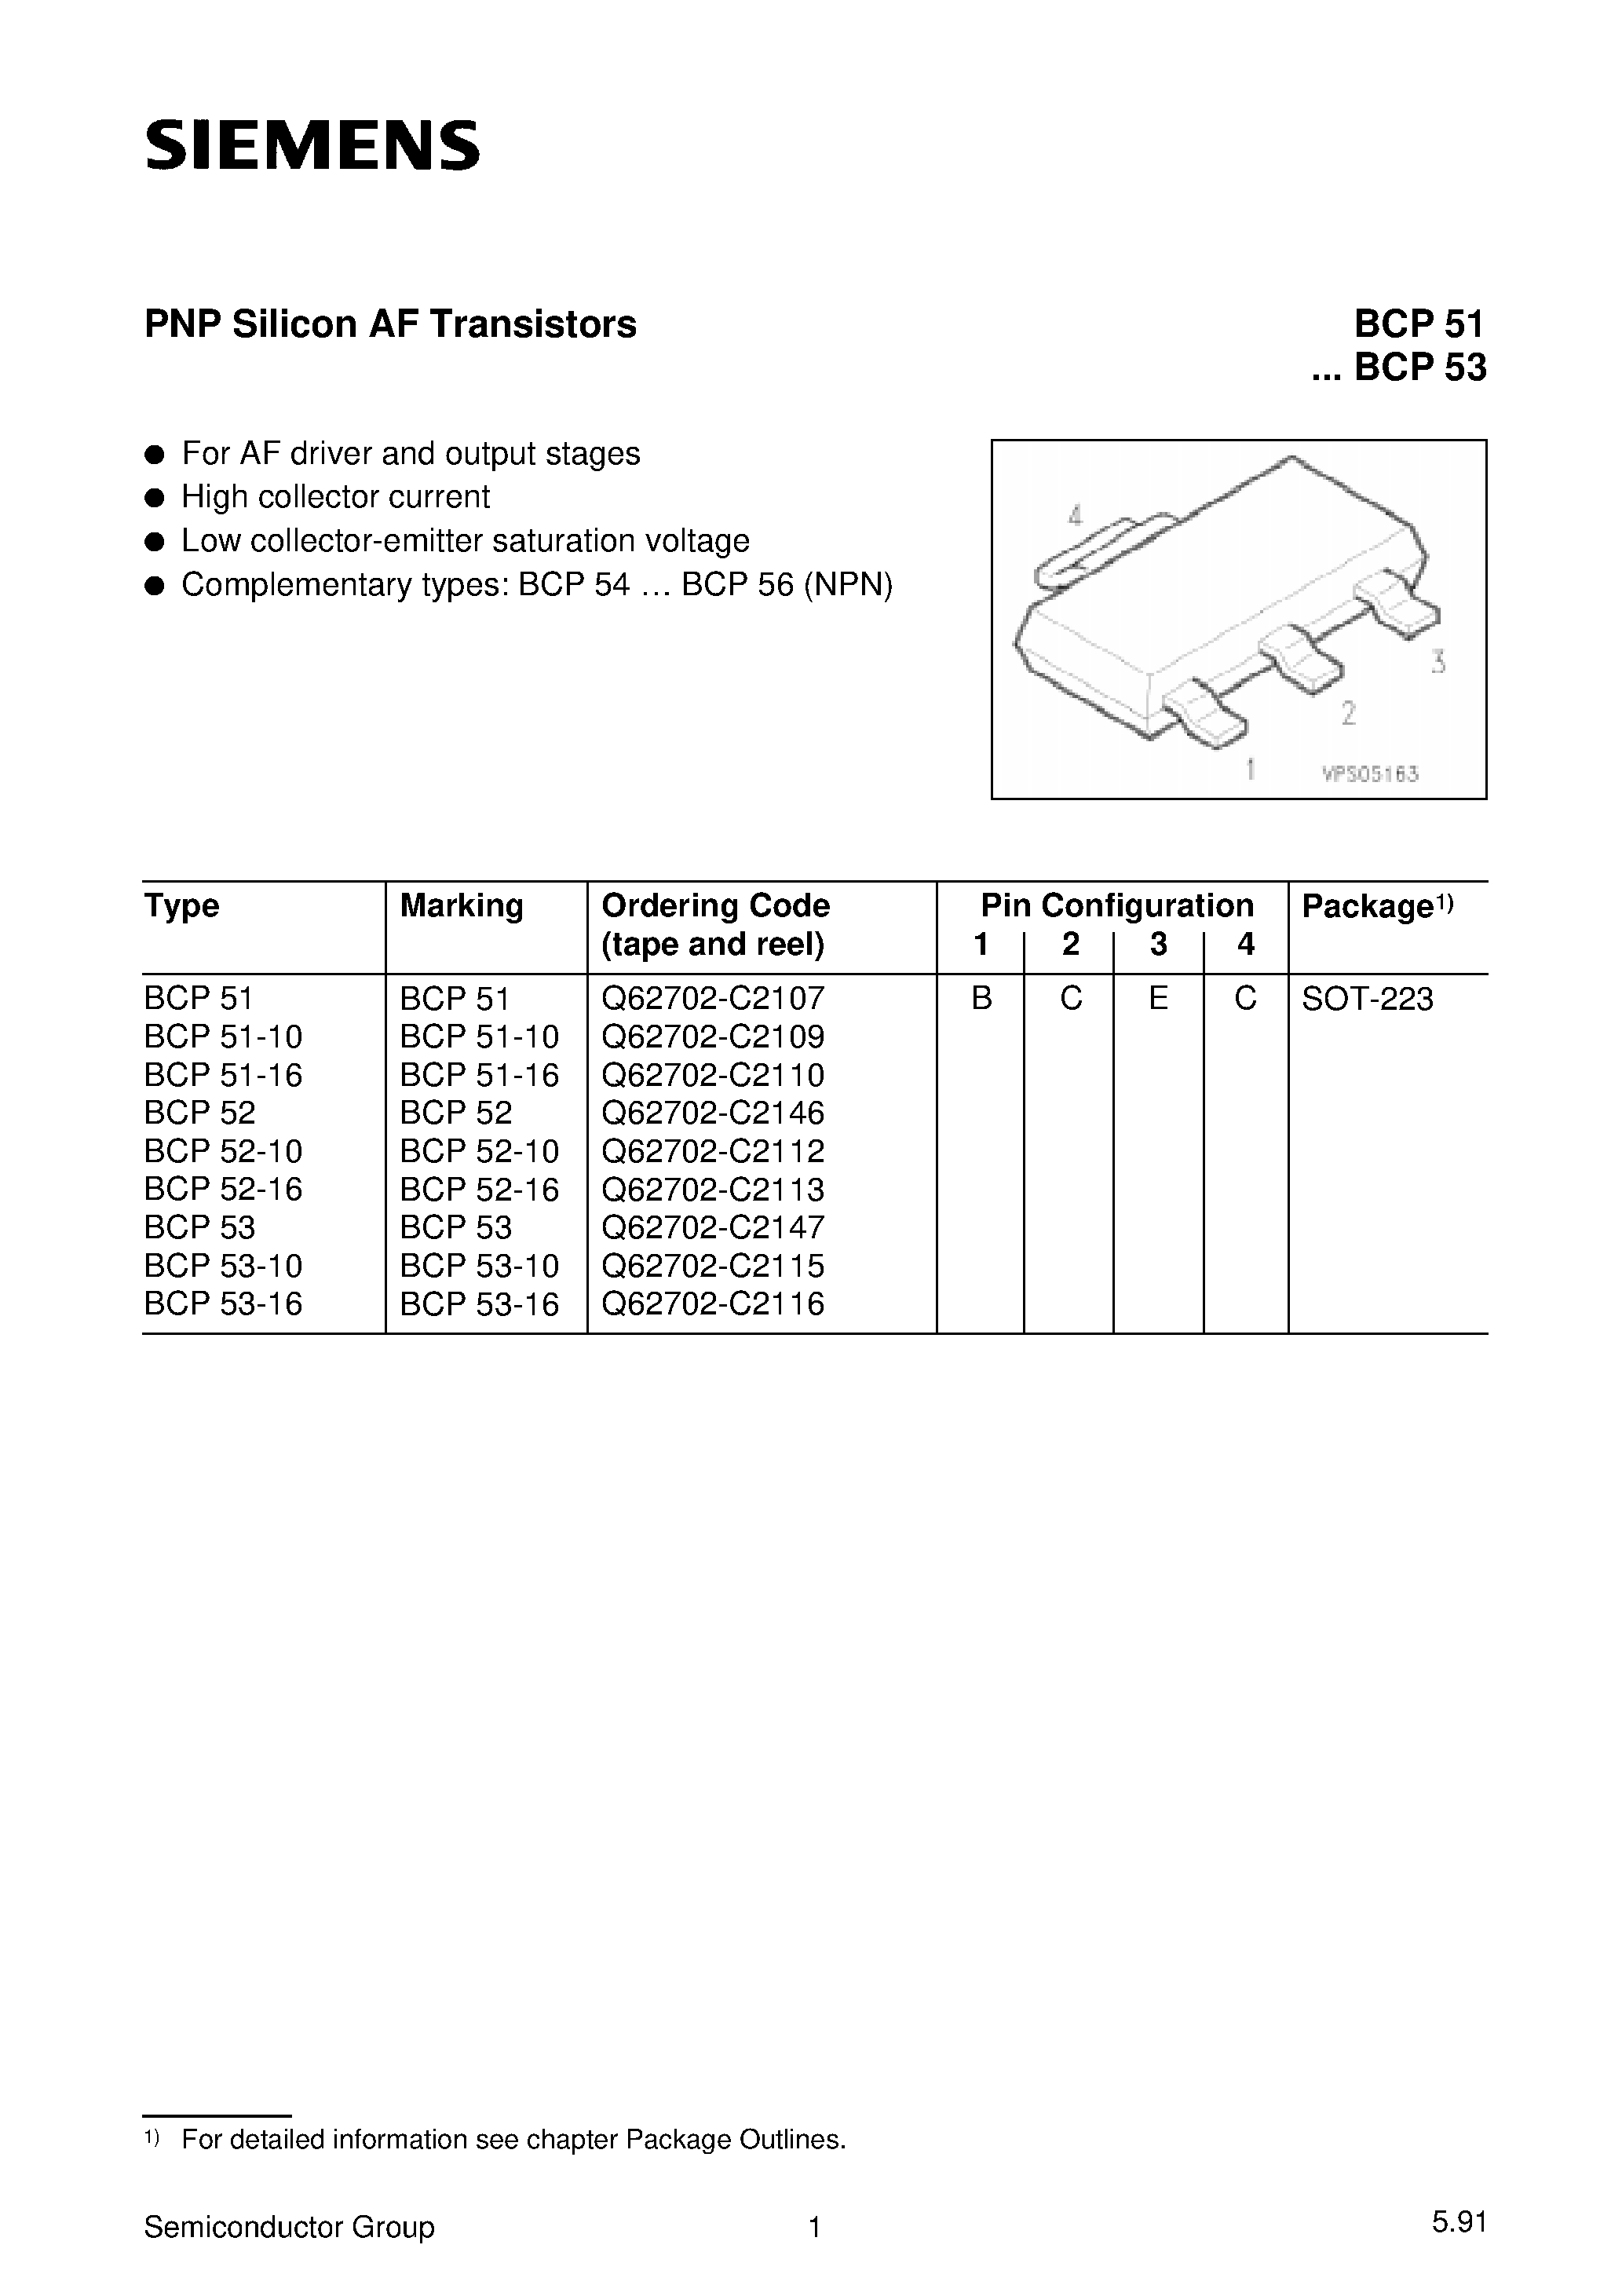 Datasheet BCP51 - PNP Silicon AF Transistors (For AF driver and output stages High collector current) page 1